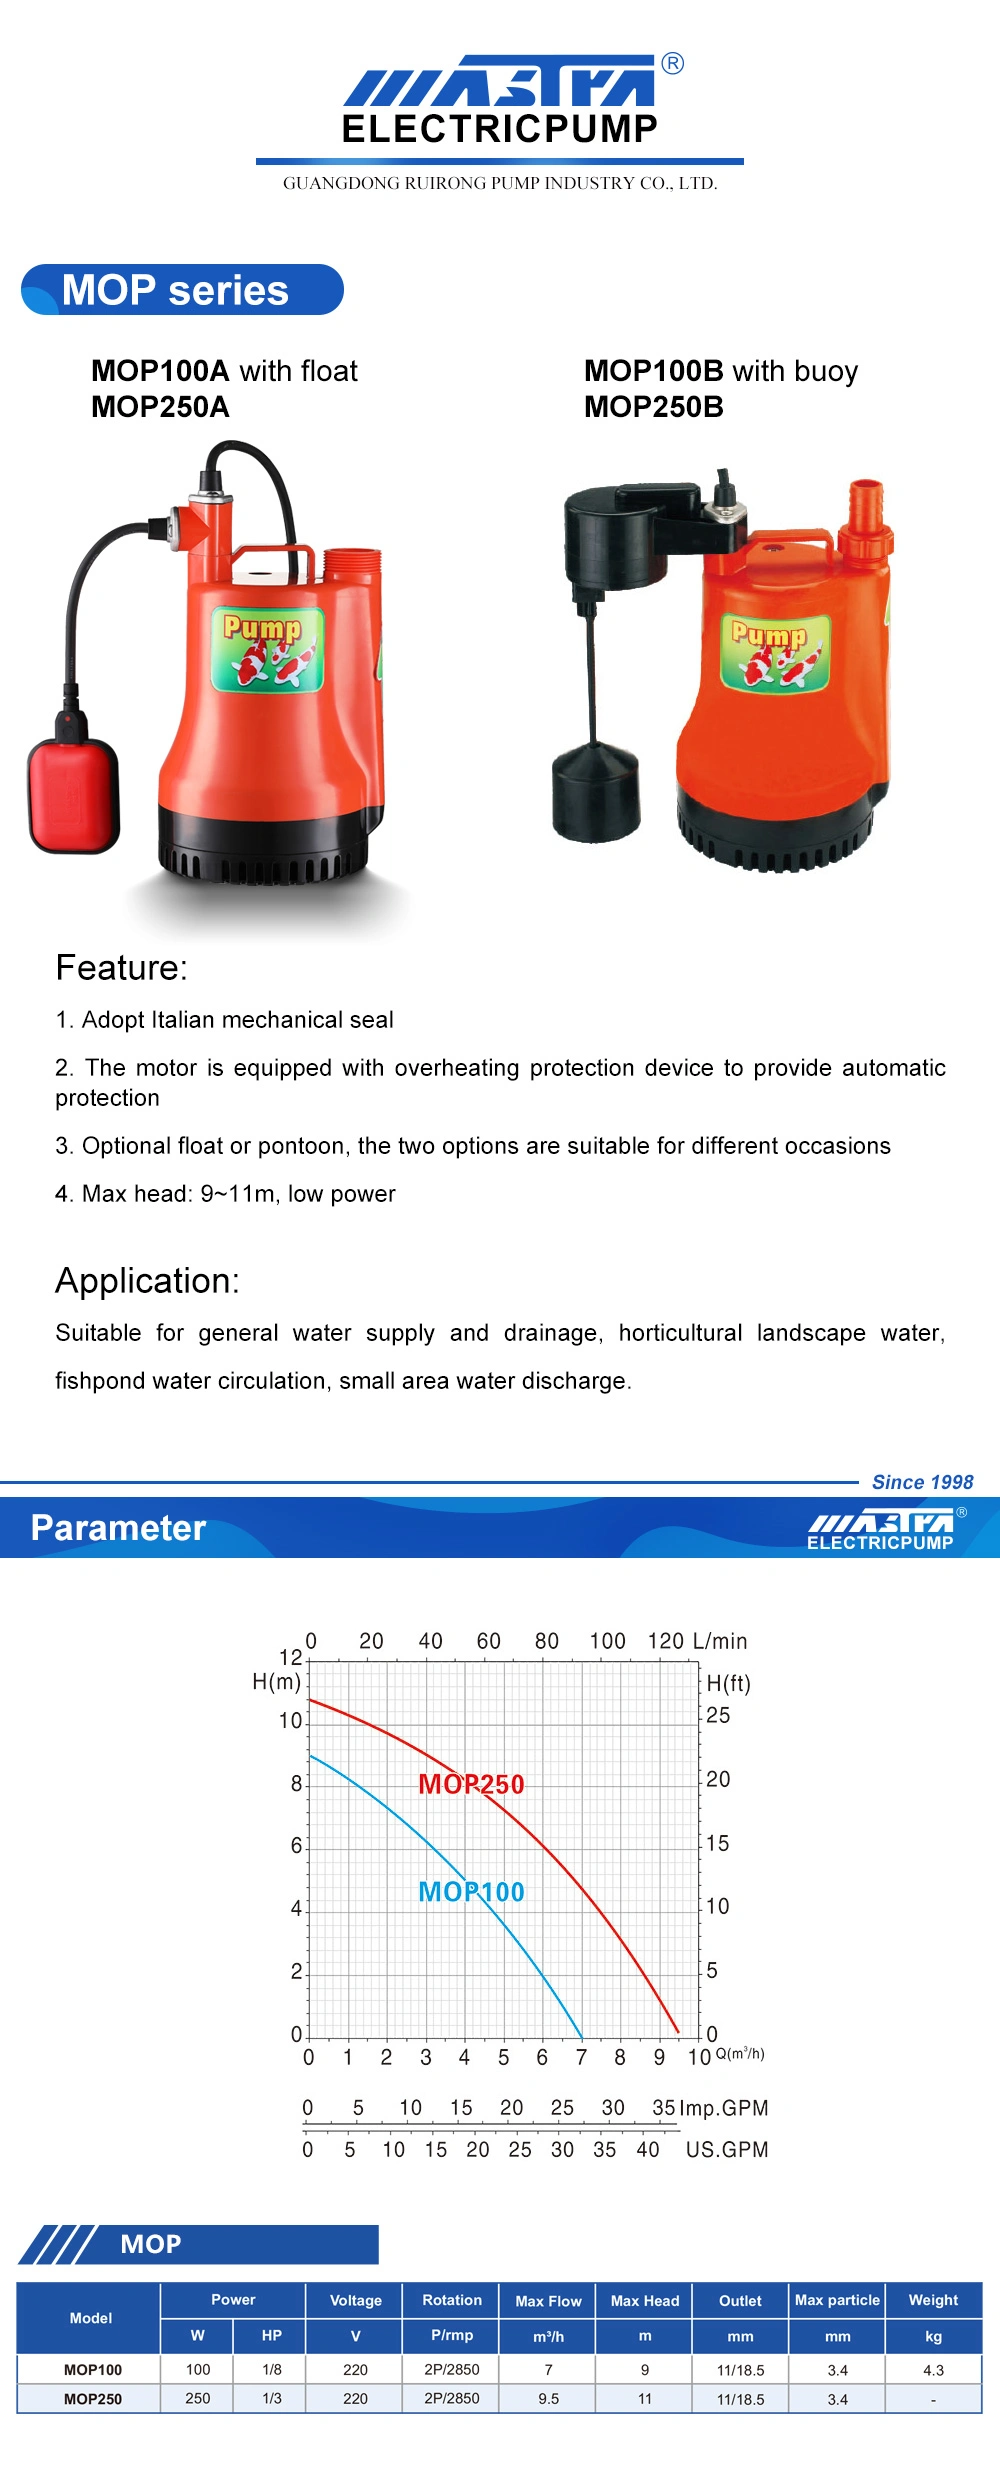 Gardening Submersible Electric Sewage Pump for Common Clean Water Supply and Drainage